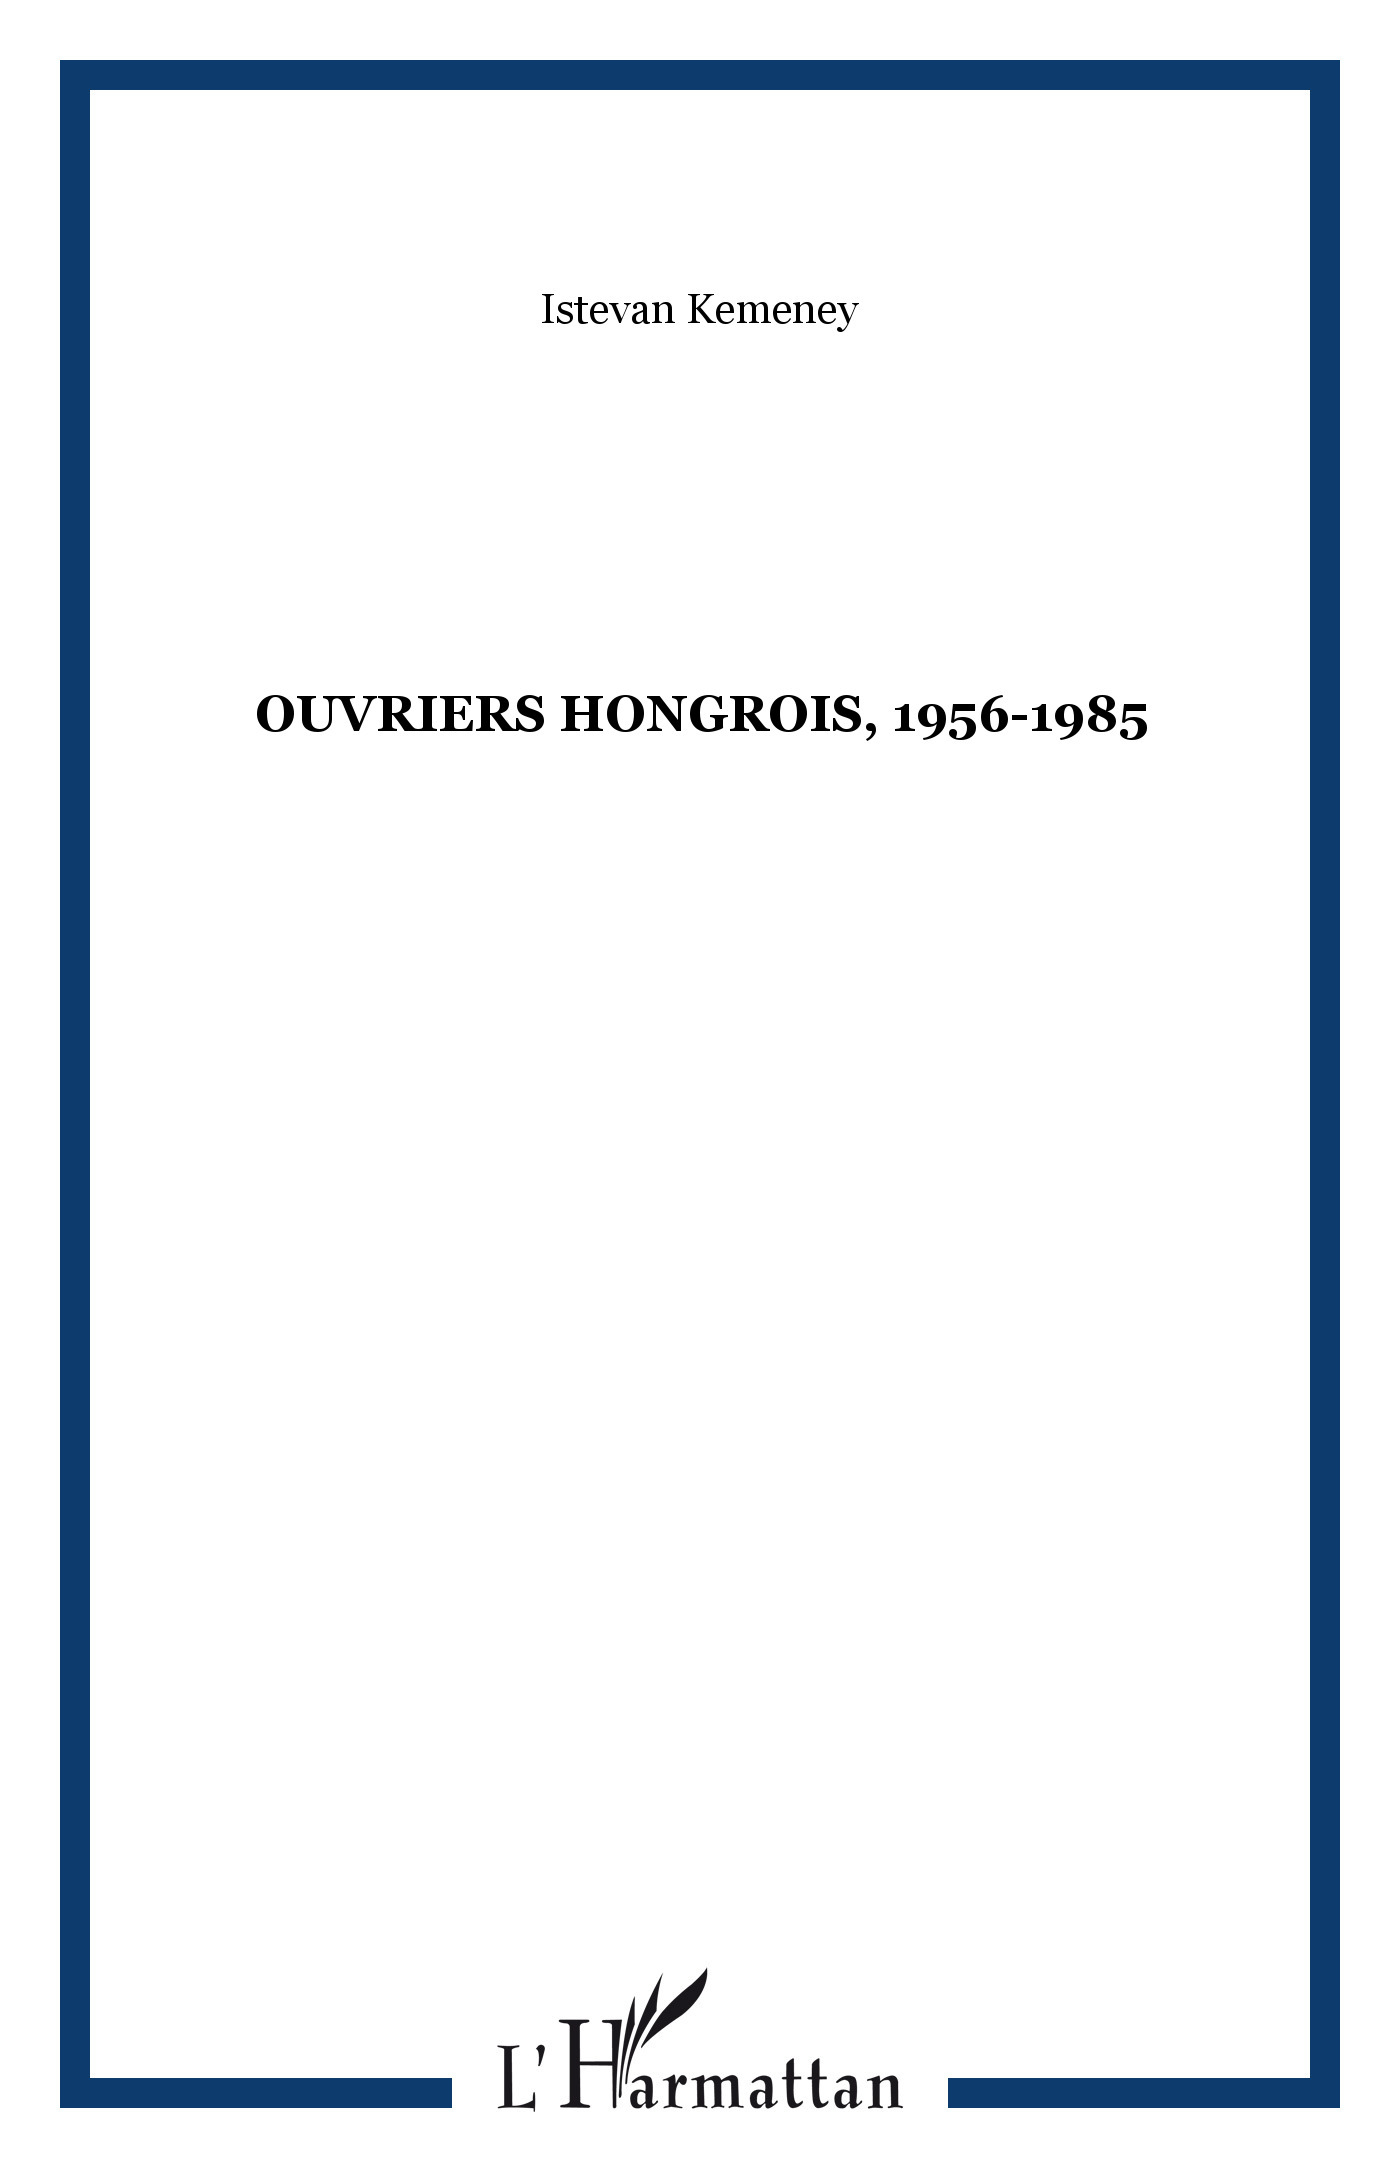 Ouvriers hongrois, 1956-1985 (9782858025244-front-cover)